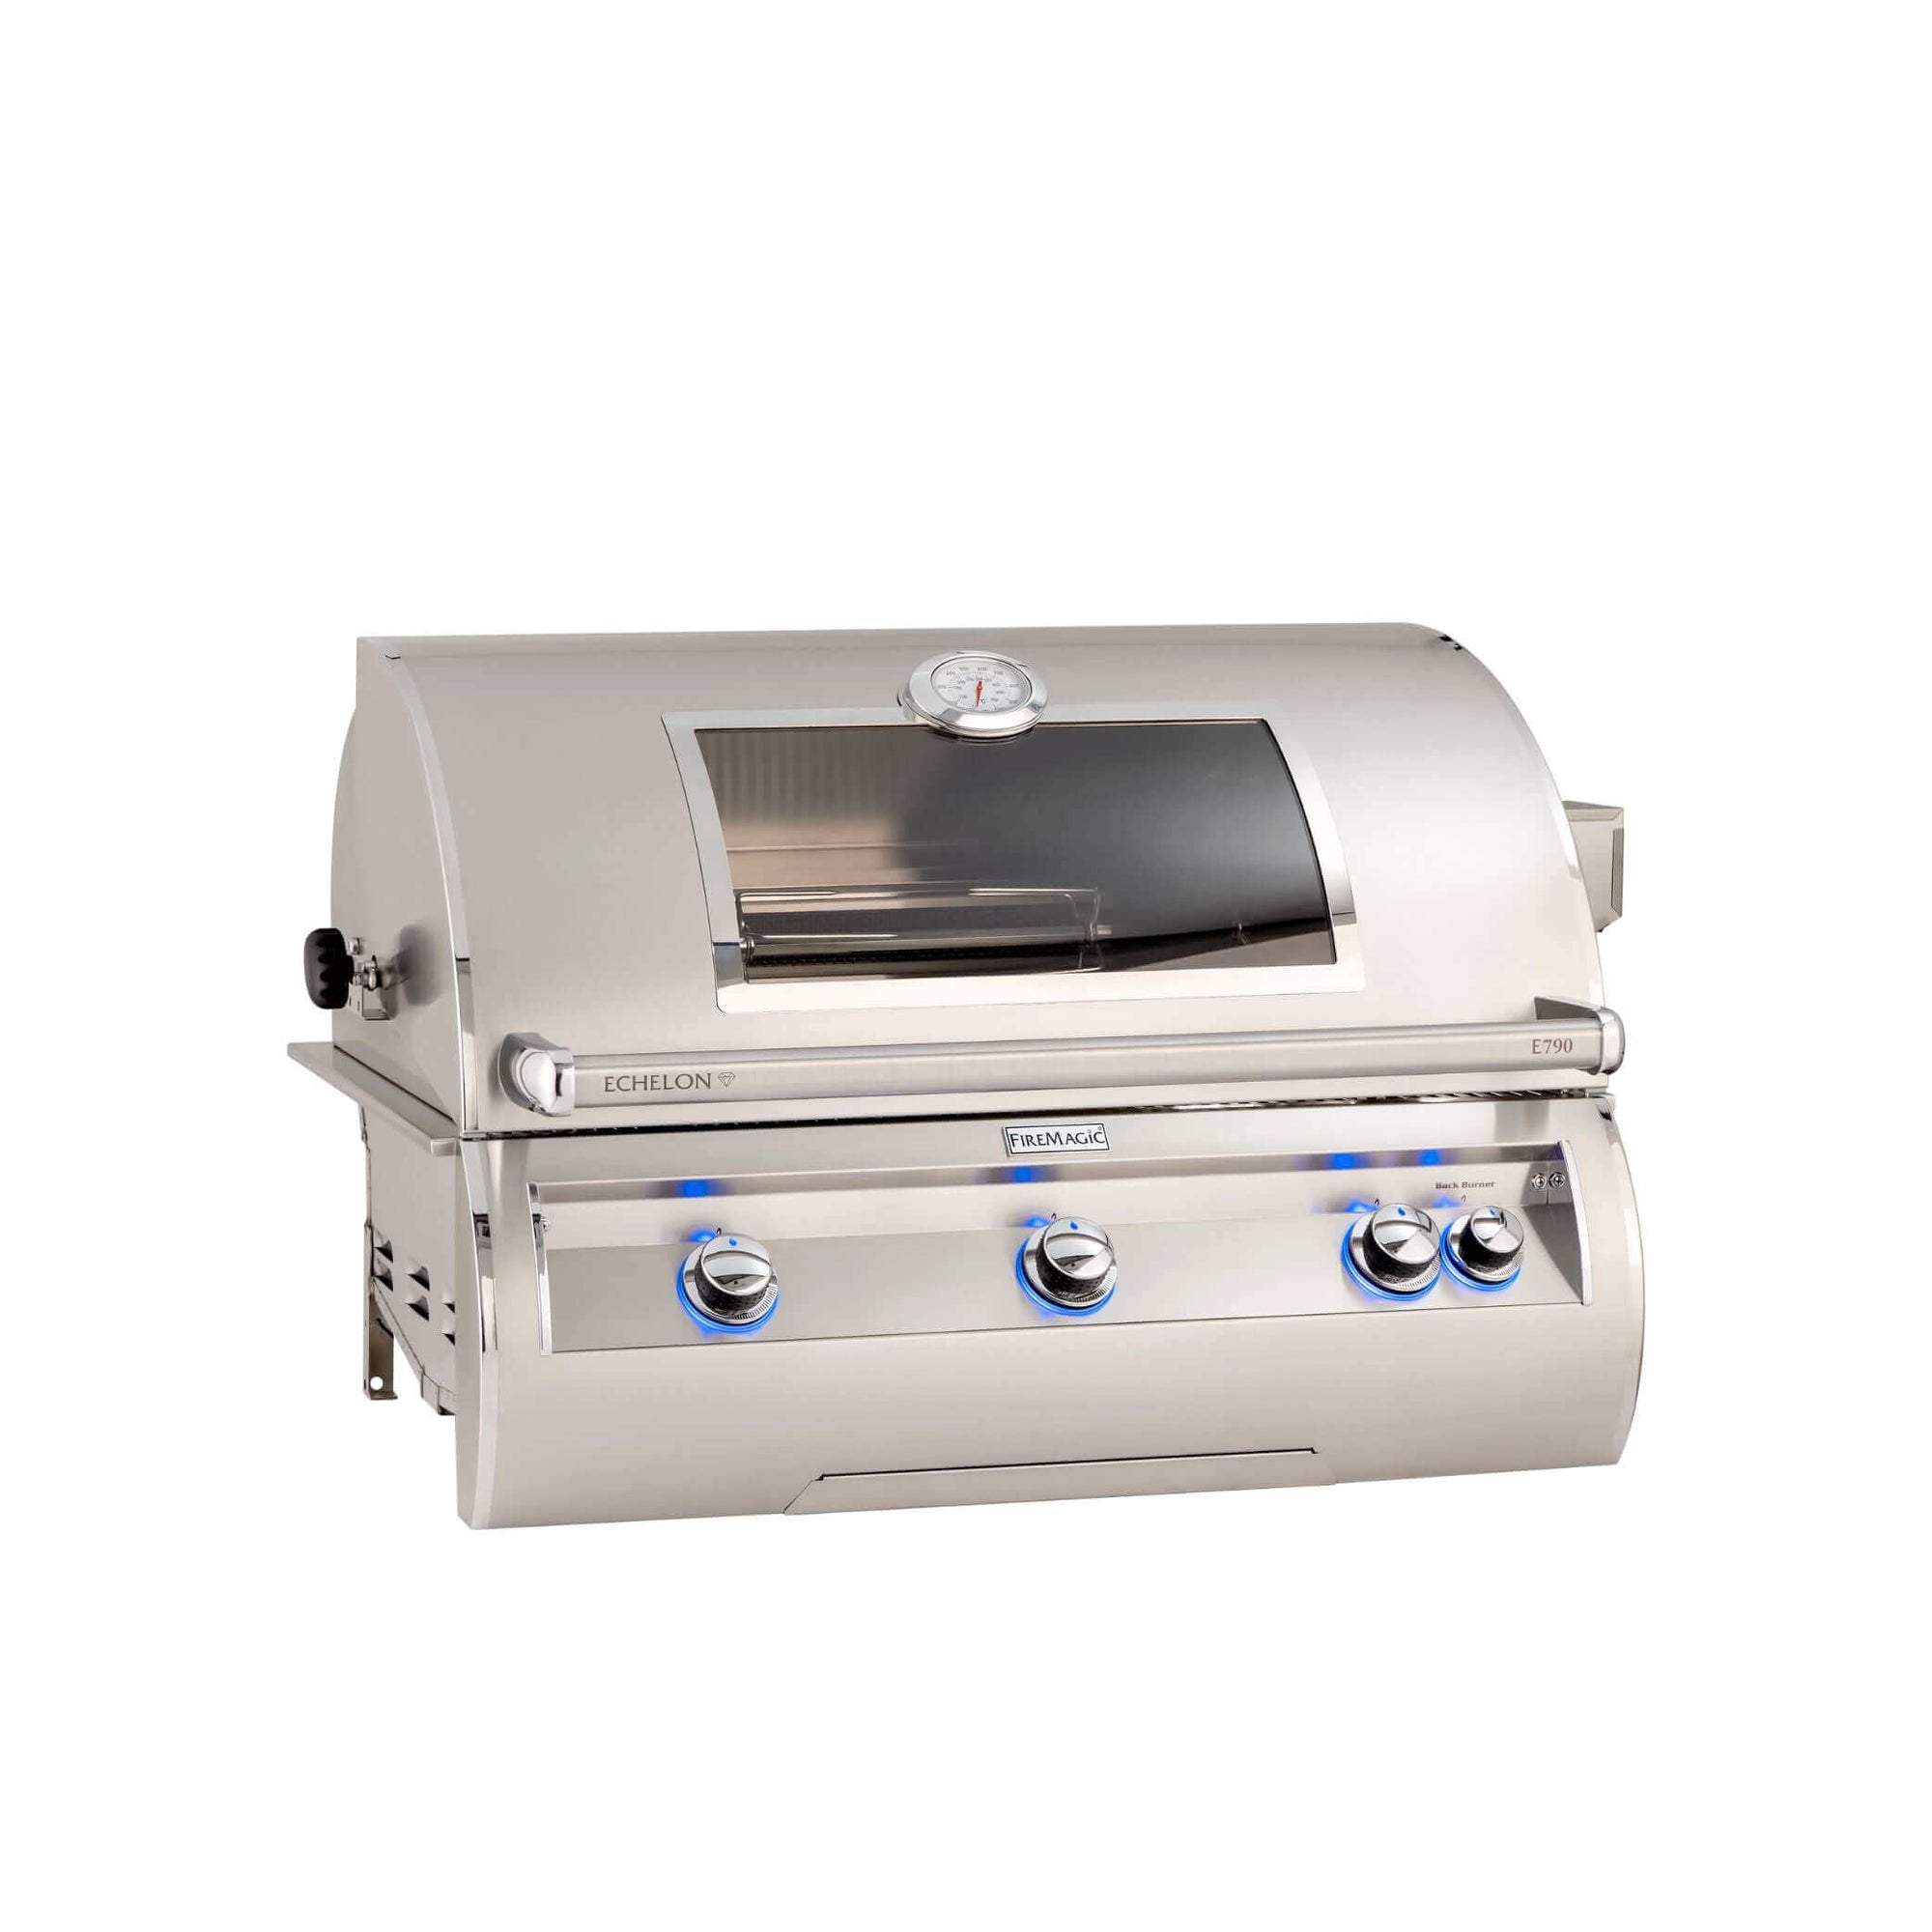 Fire Magic Echelon Diamond E790I 36" Built-In Grill With Analog Thermometer & Sear Burner-Natural Gas